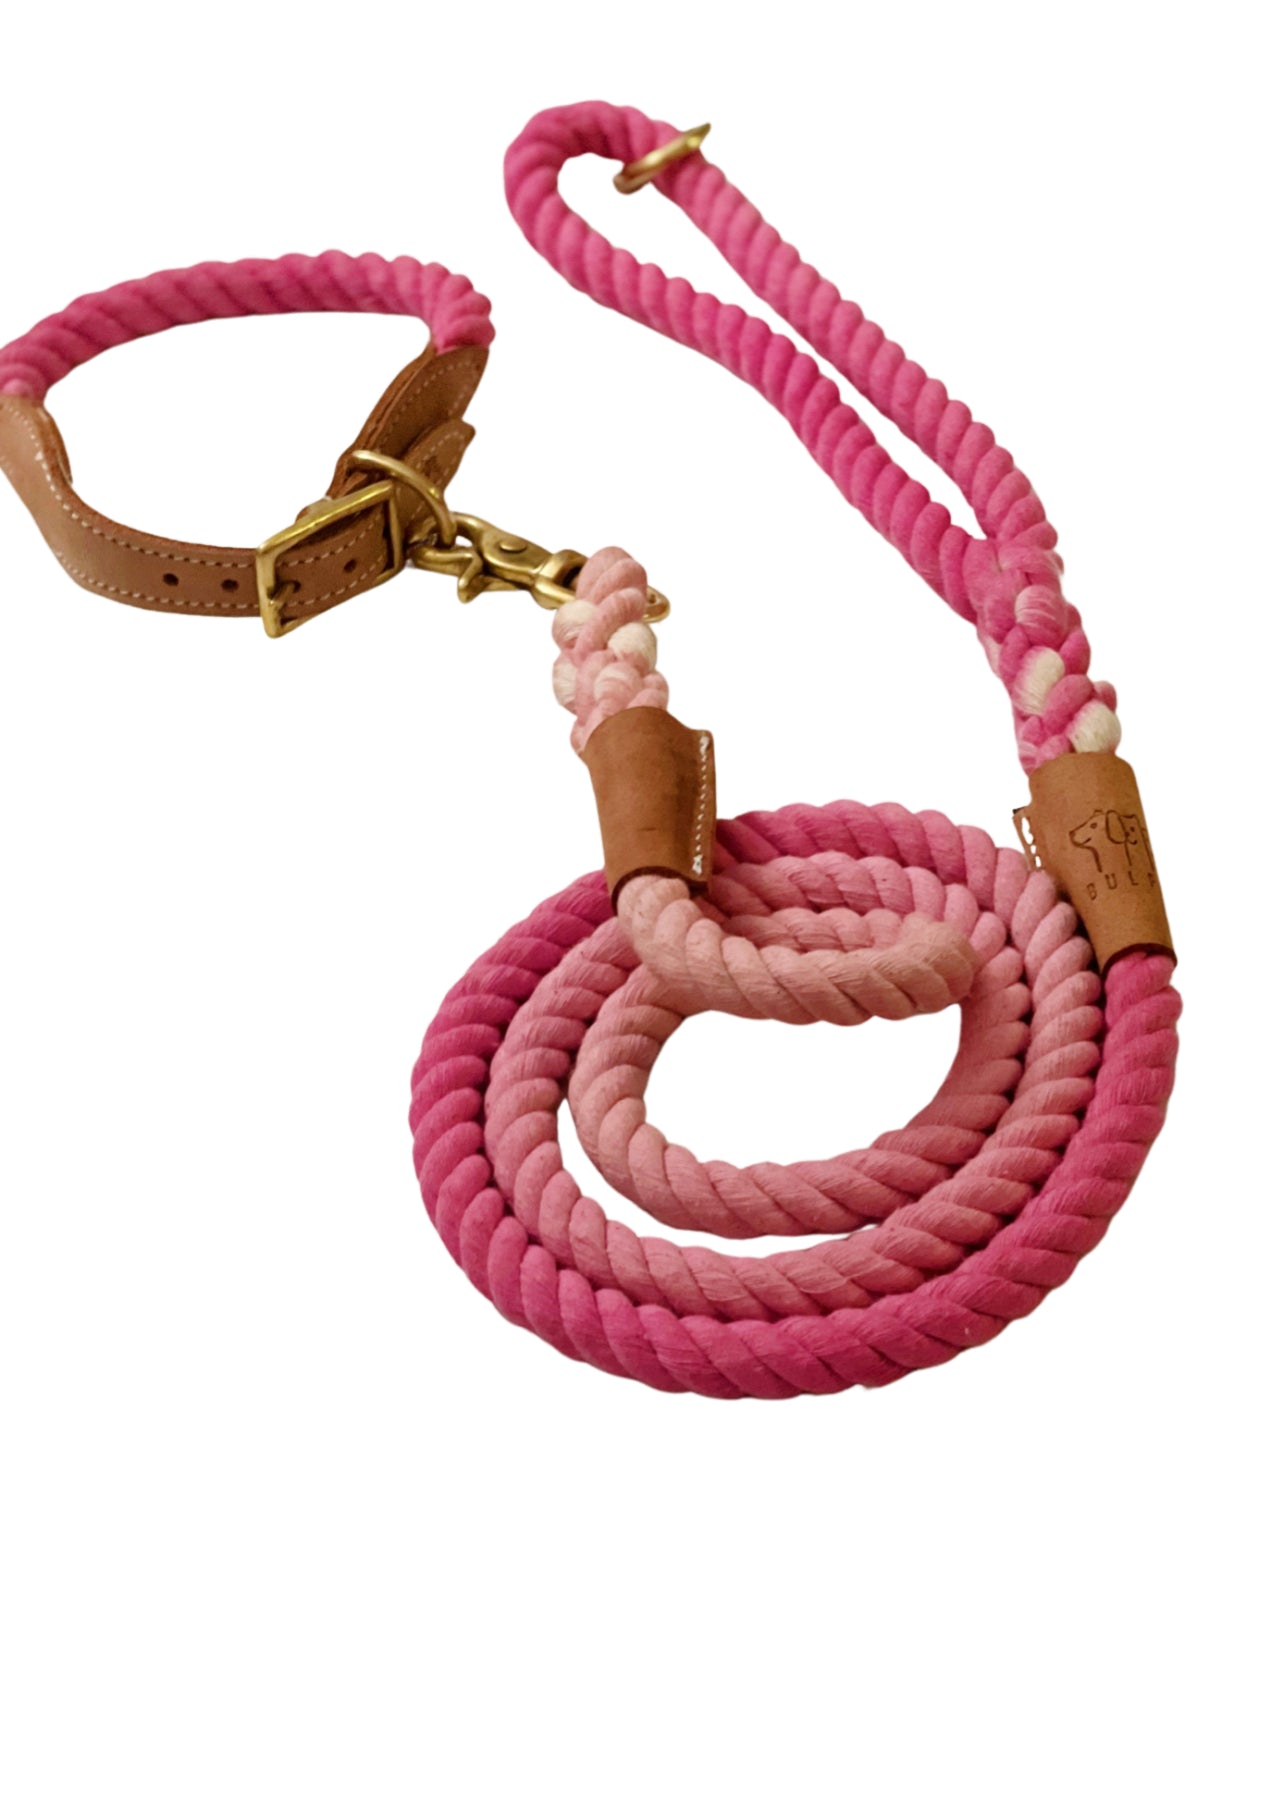 BULPET Eco Friendly Natural Cotton Handmade Dog Ombre Pink Rope Leash with Brown Leather and Gold Brass Hardware/ 5 Ft/ All Dogs